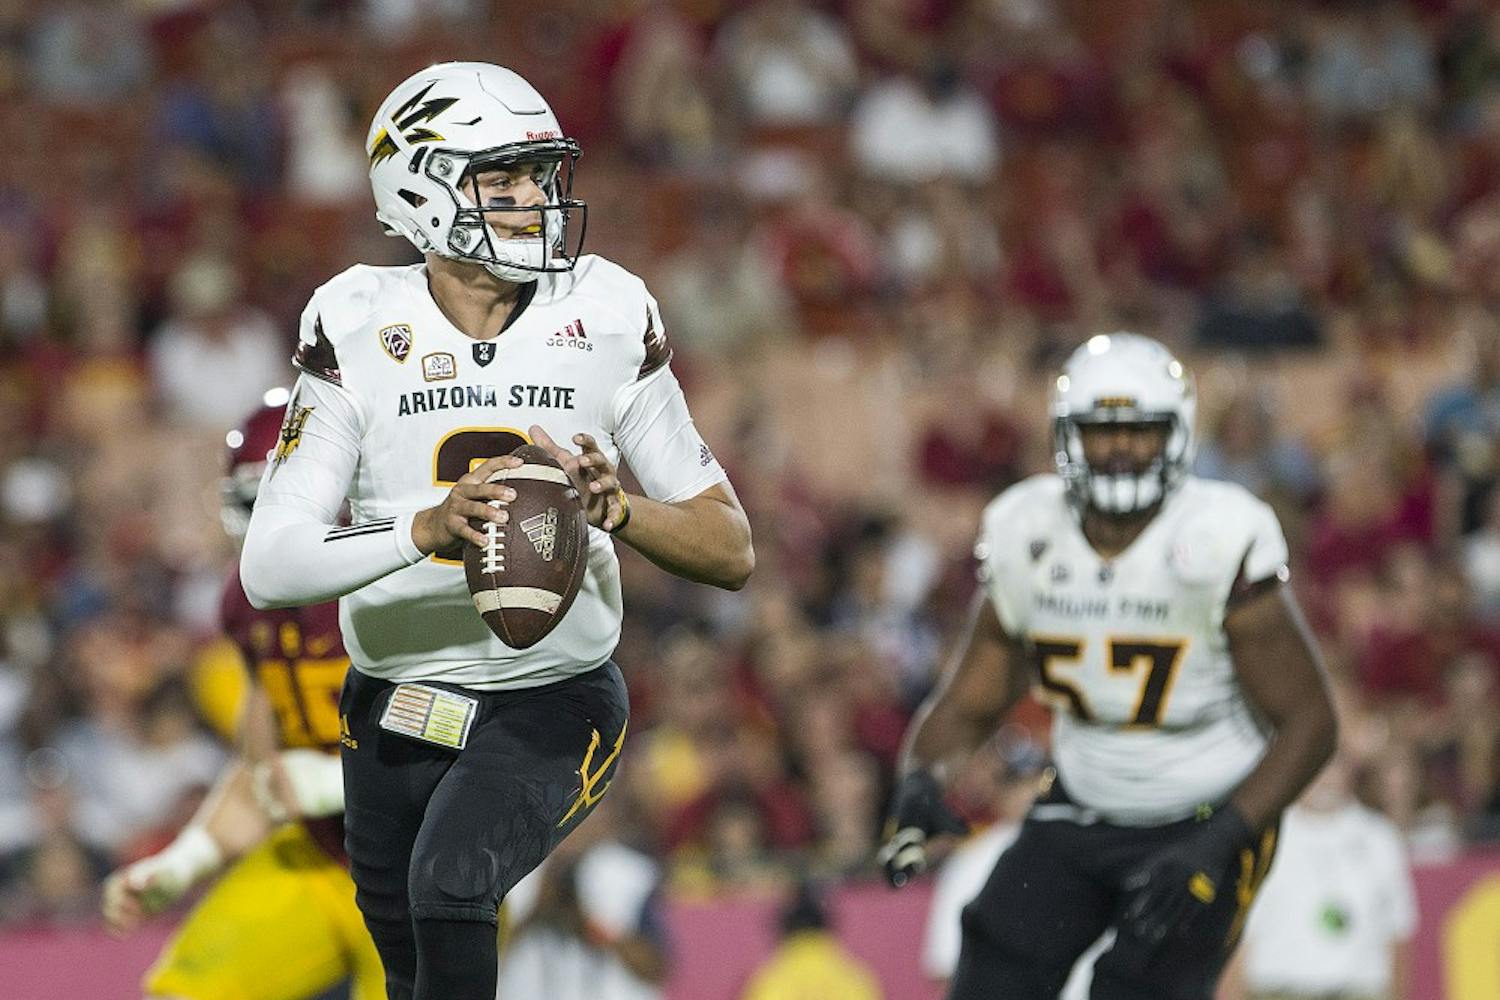 ASU Sun Devils quarterback Brady White (2) looks for an open receiver during a game against the USC Trojans in the Los Angeles Memorial Coliseum on Saturday, Oct. 1, 2016.  The Sun Devils lost the contest, 41-20.